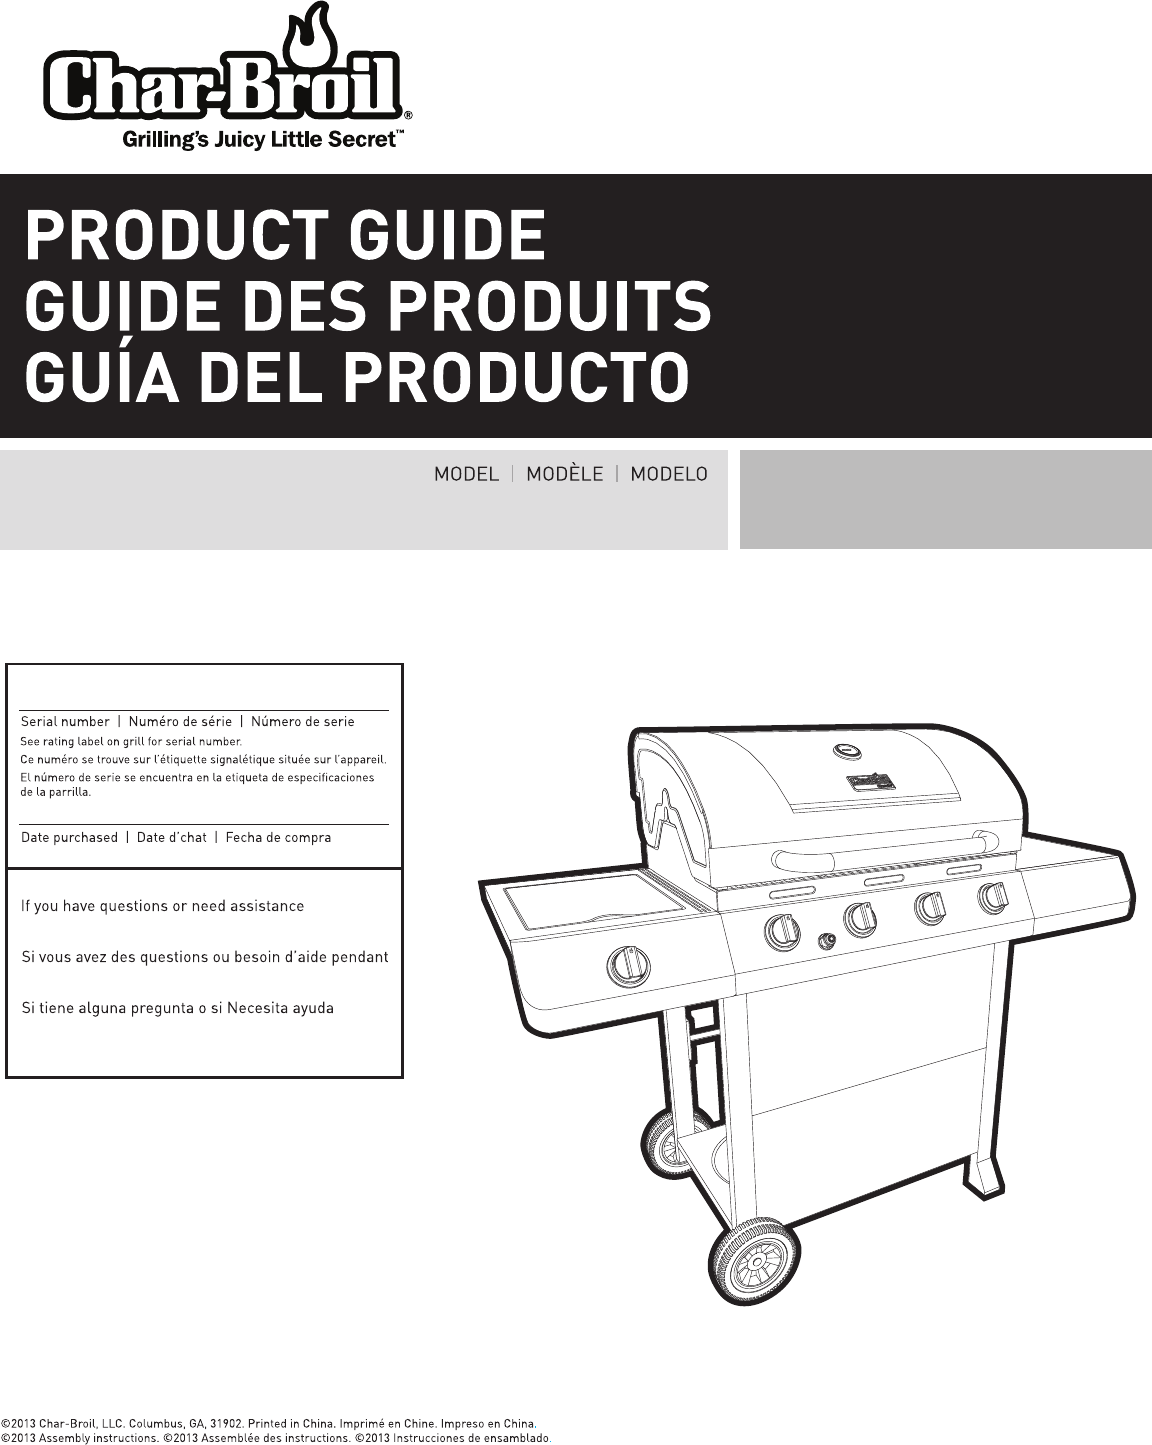 User manual Char-Broil 7185637 (English - 2 pages)